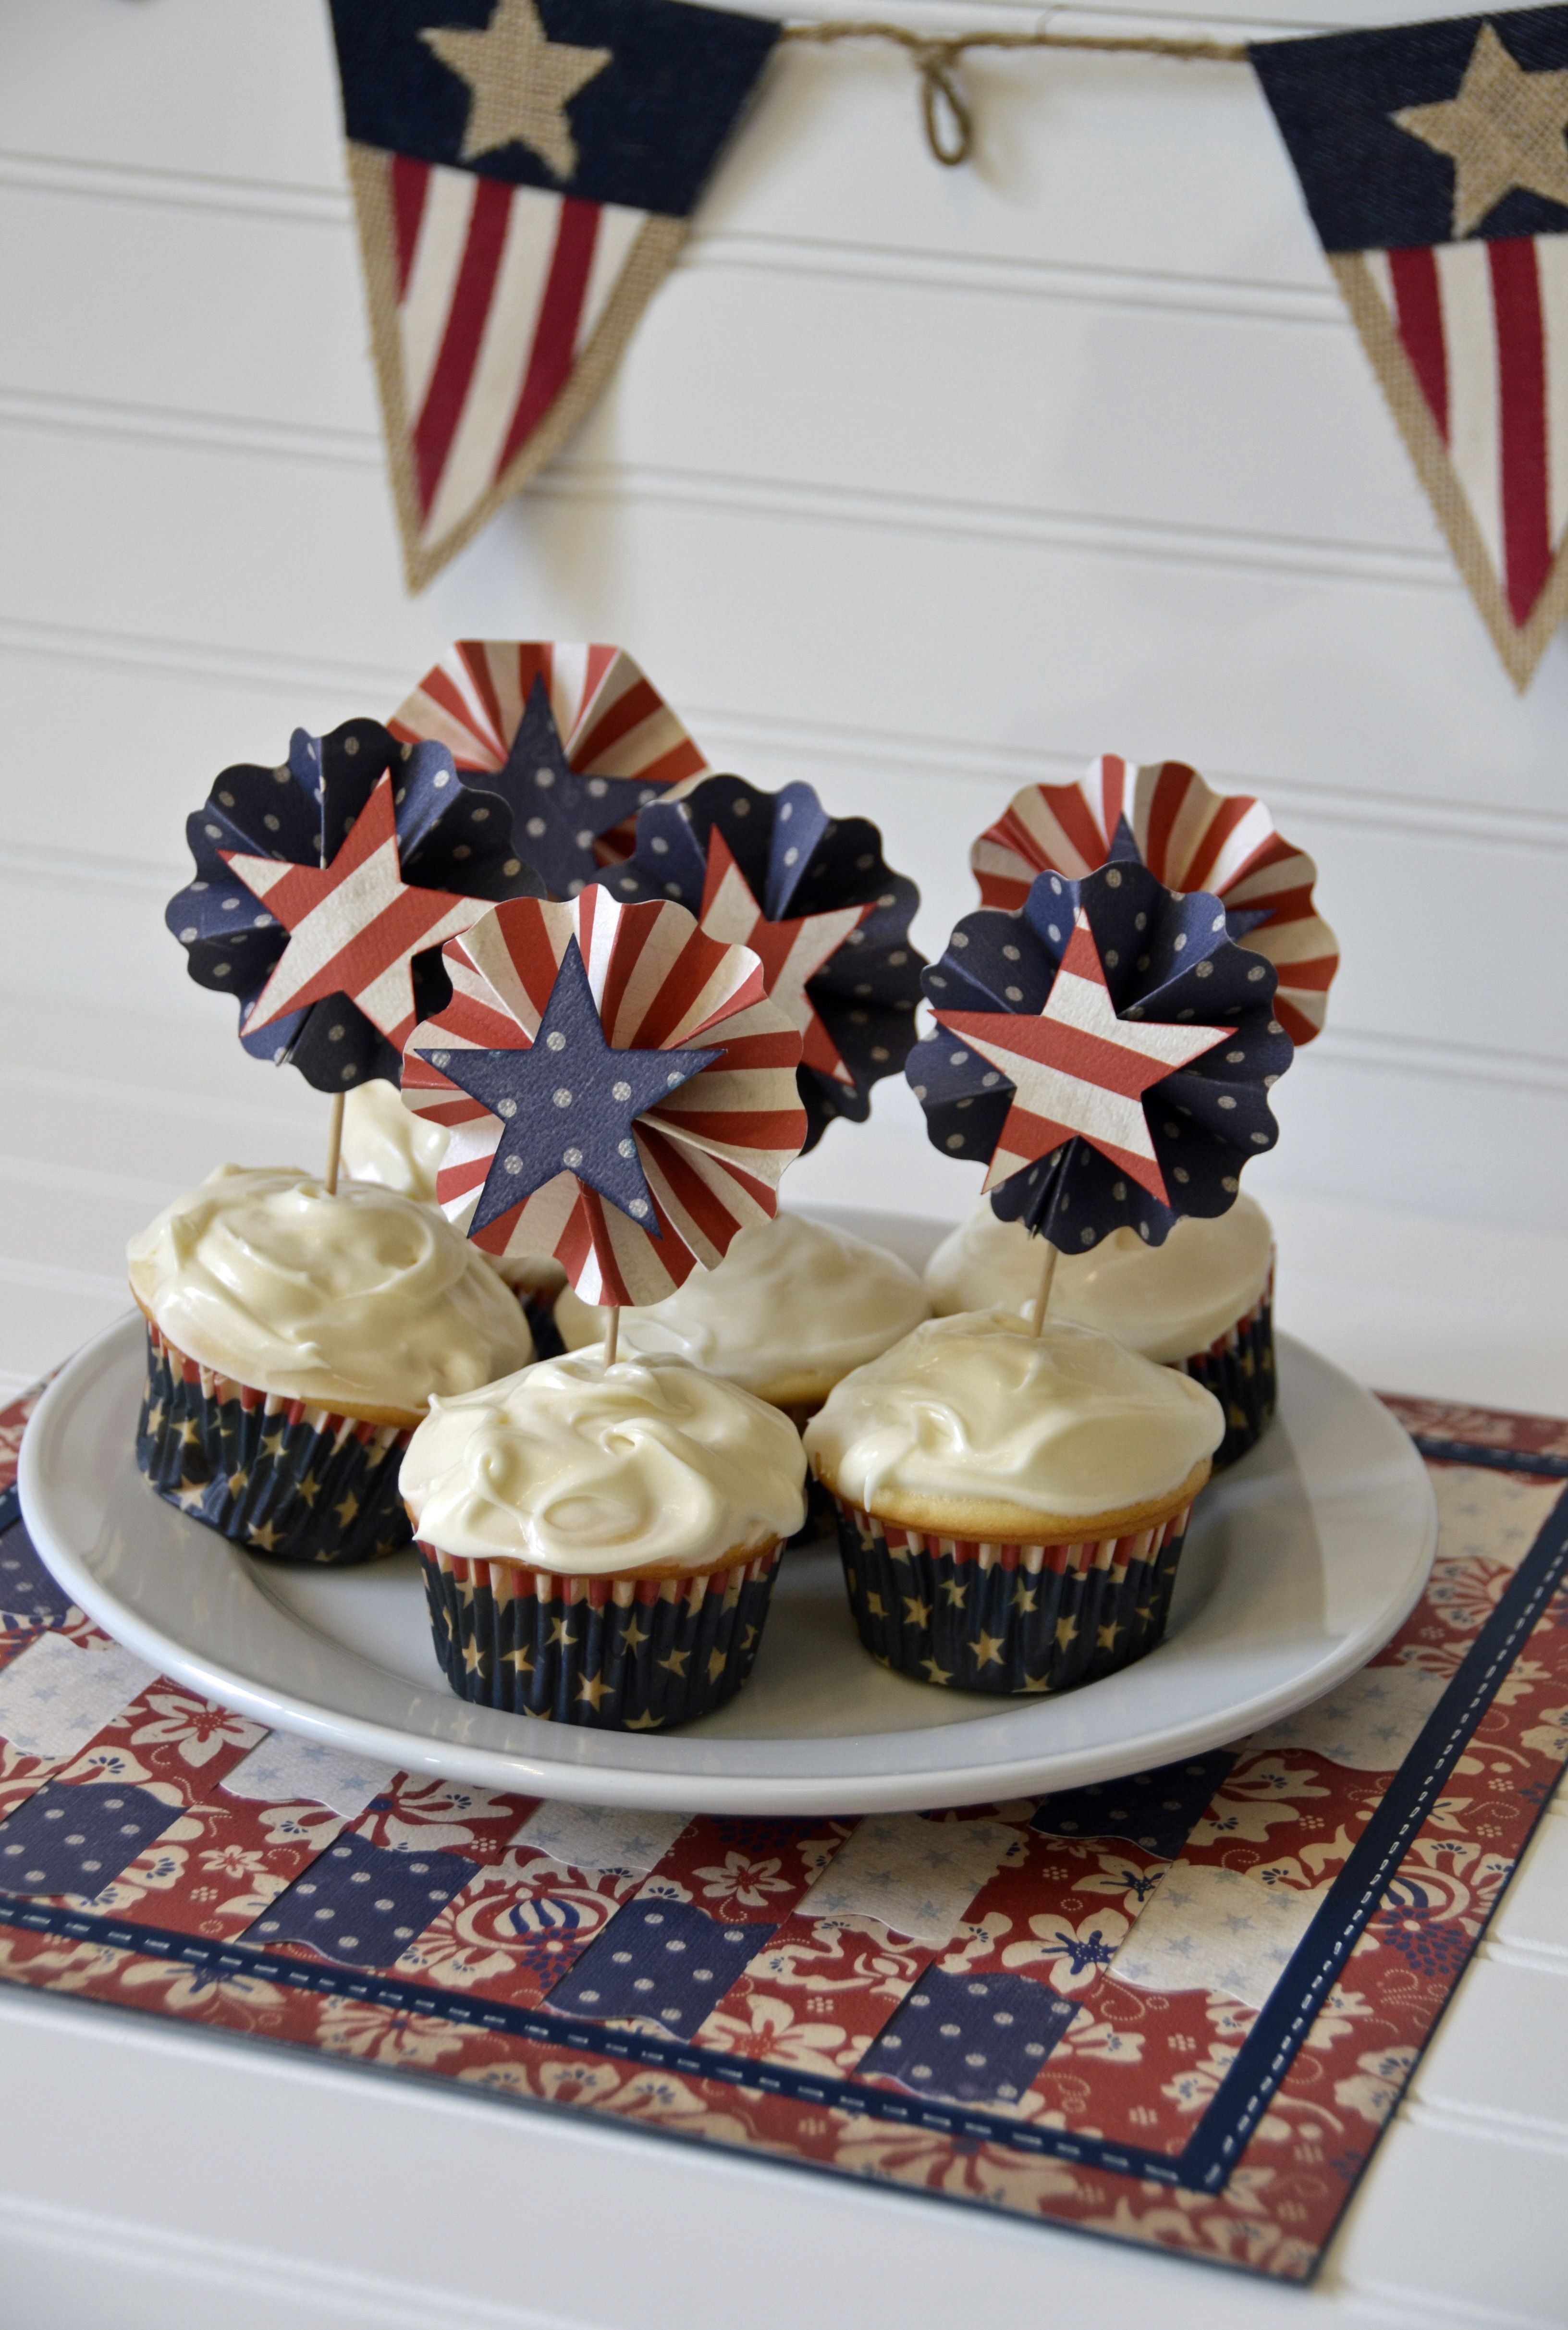 Cupcake Papercraft Patriotic Cupcake topper and Woven Placement Created by Erin